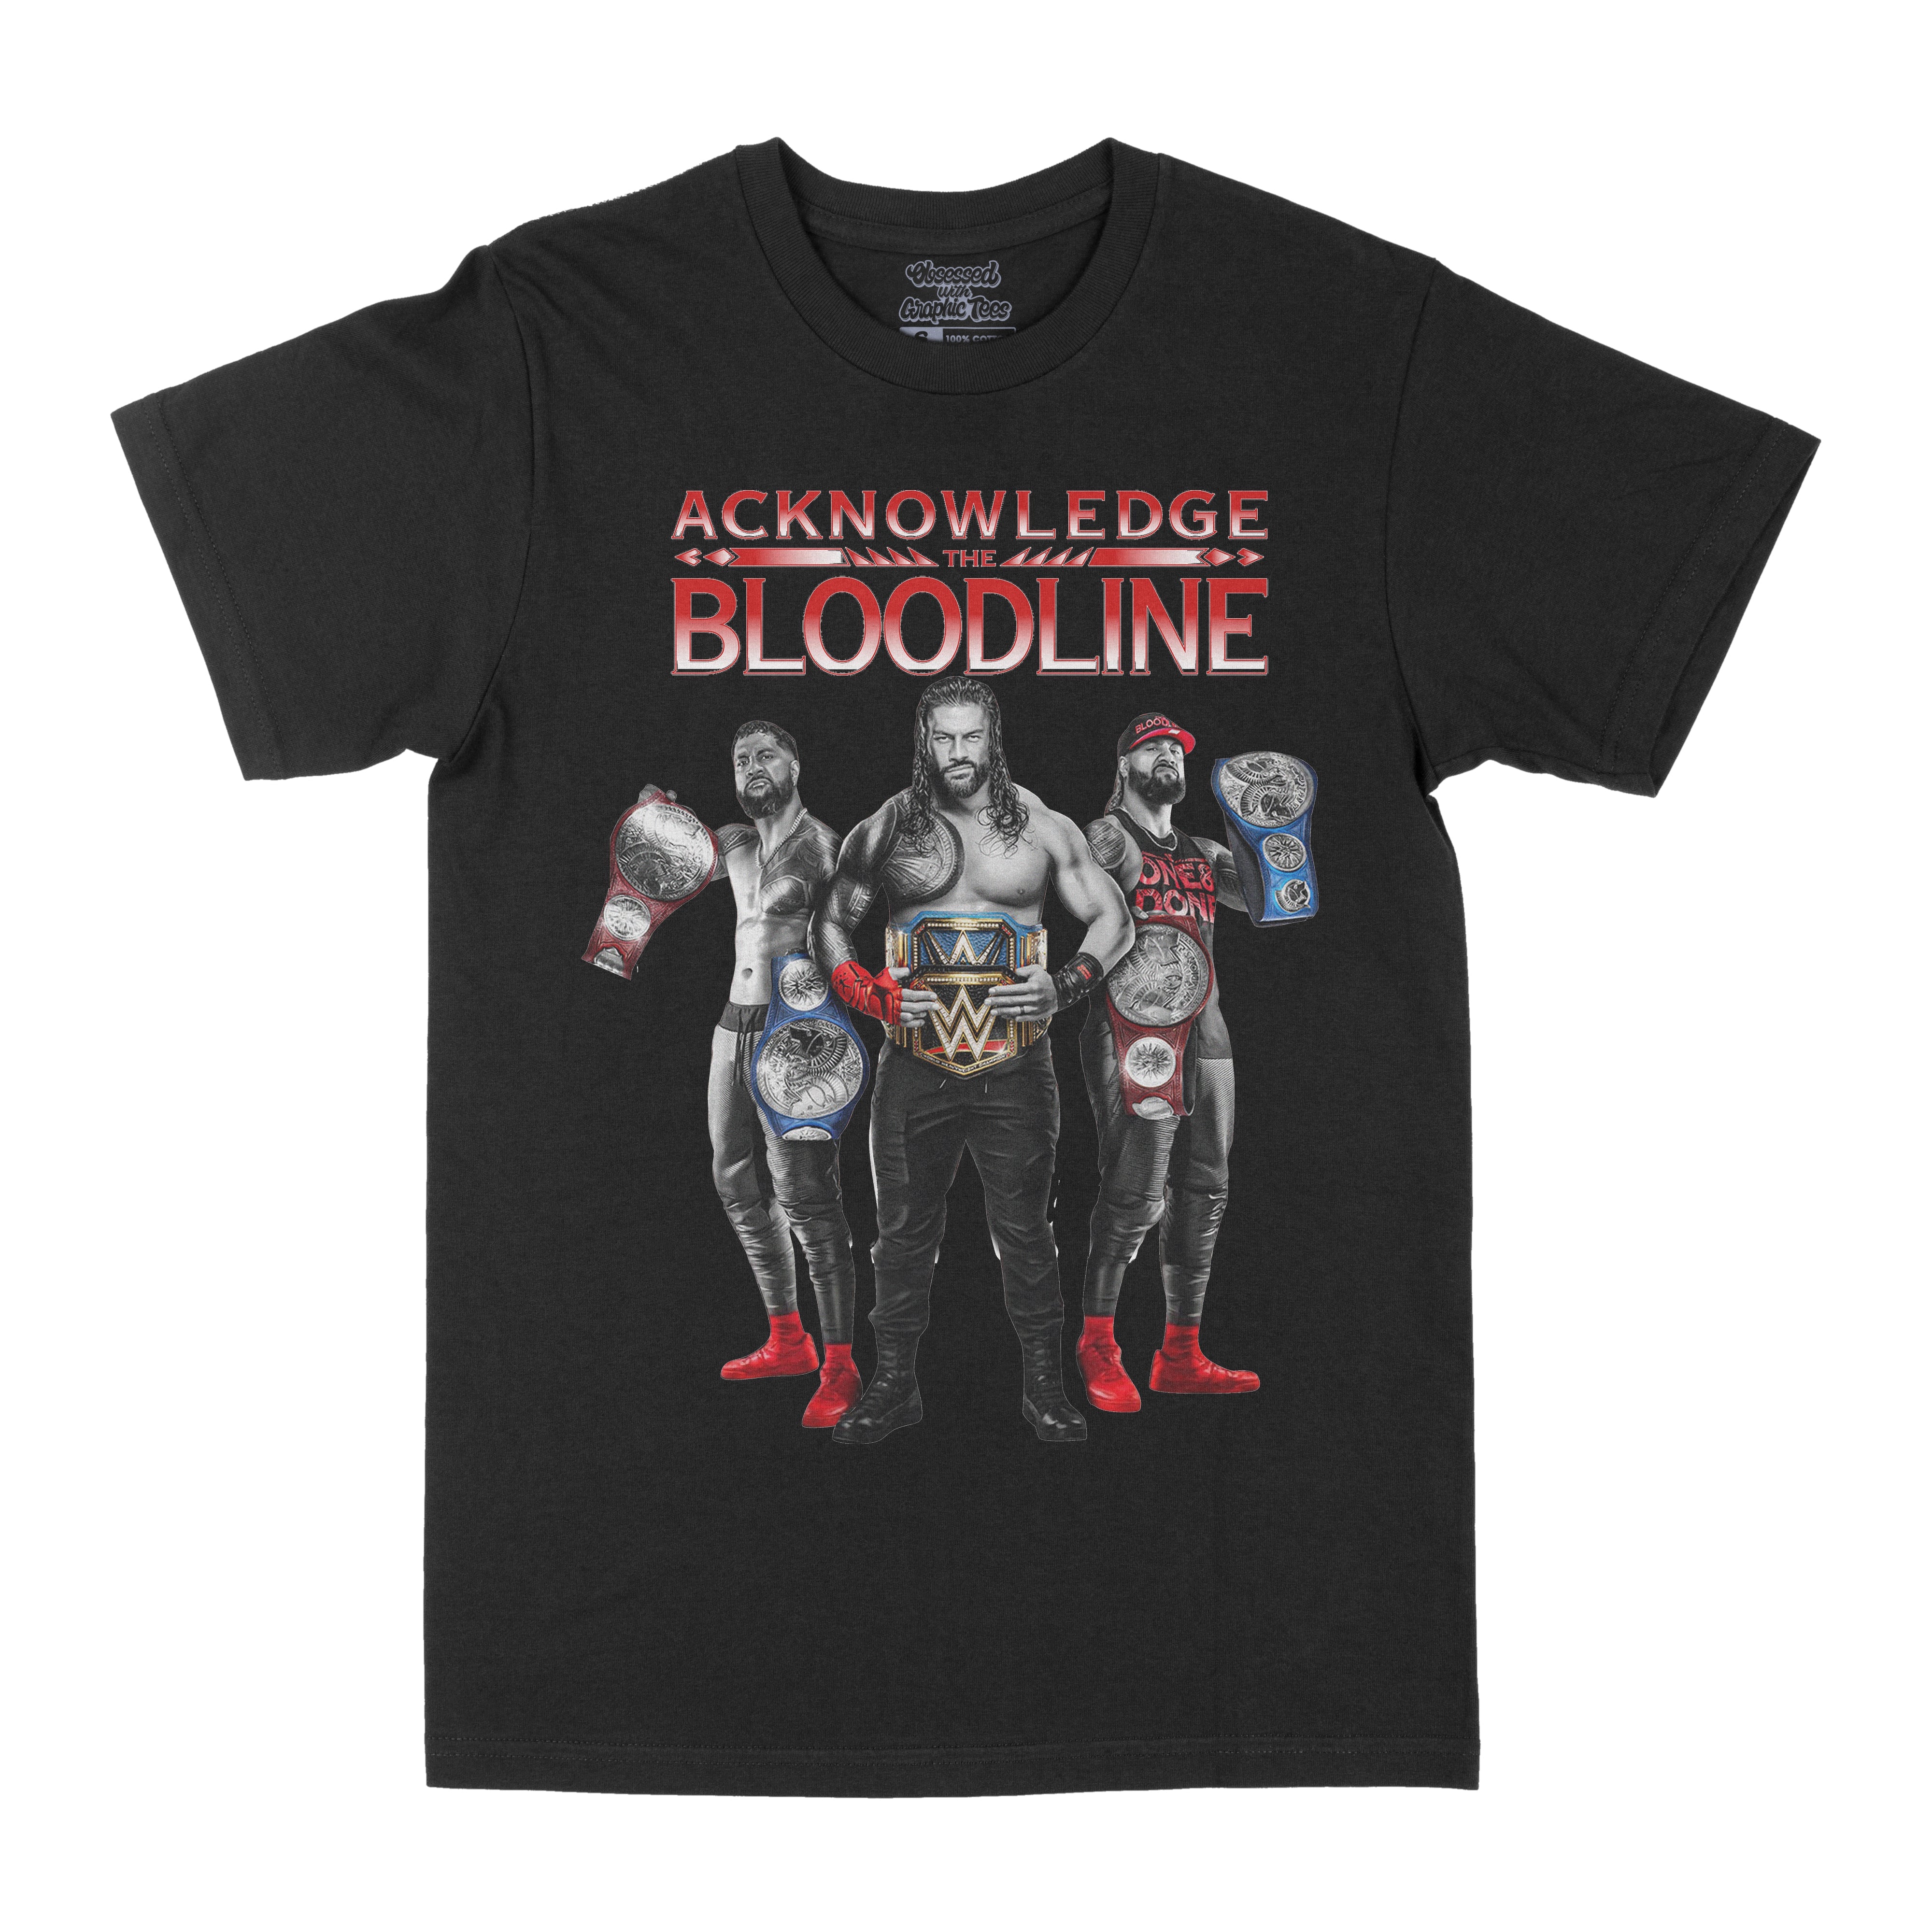 The Bloodline Graphic Tee